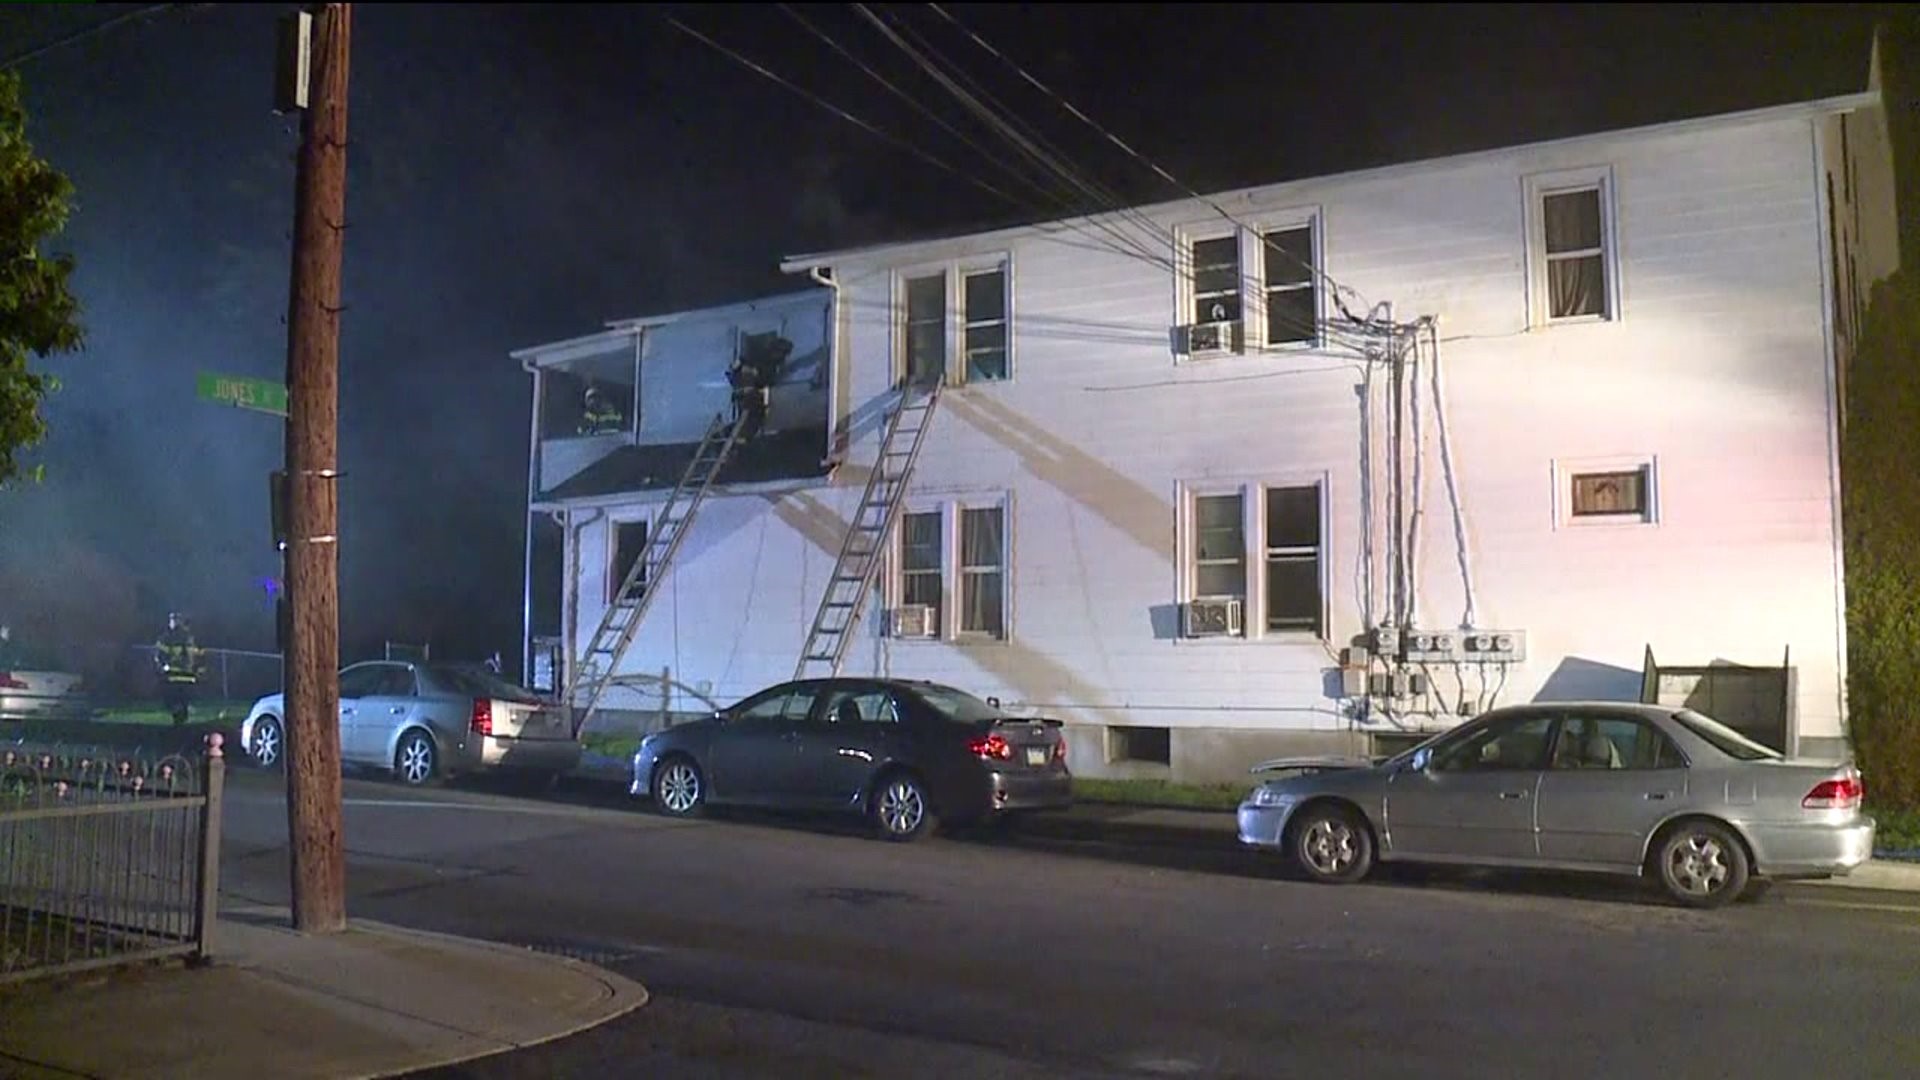 Apartment Fire Displaces 9 People in Luzerne County